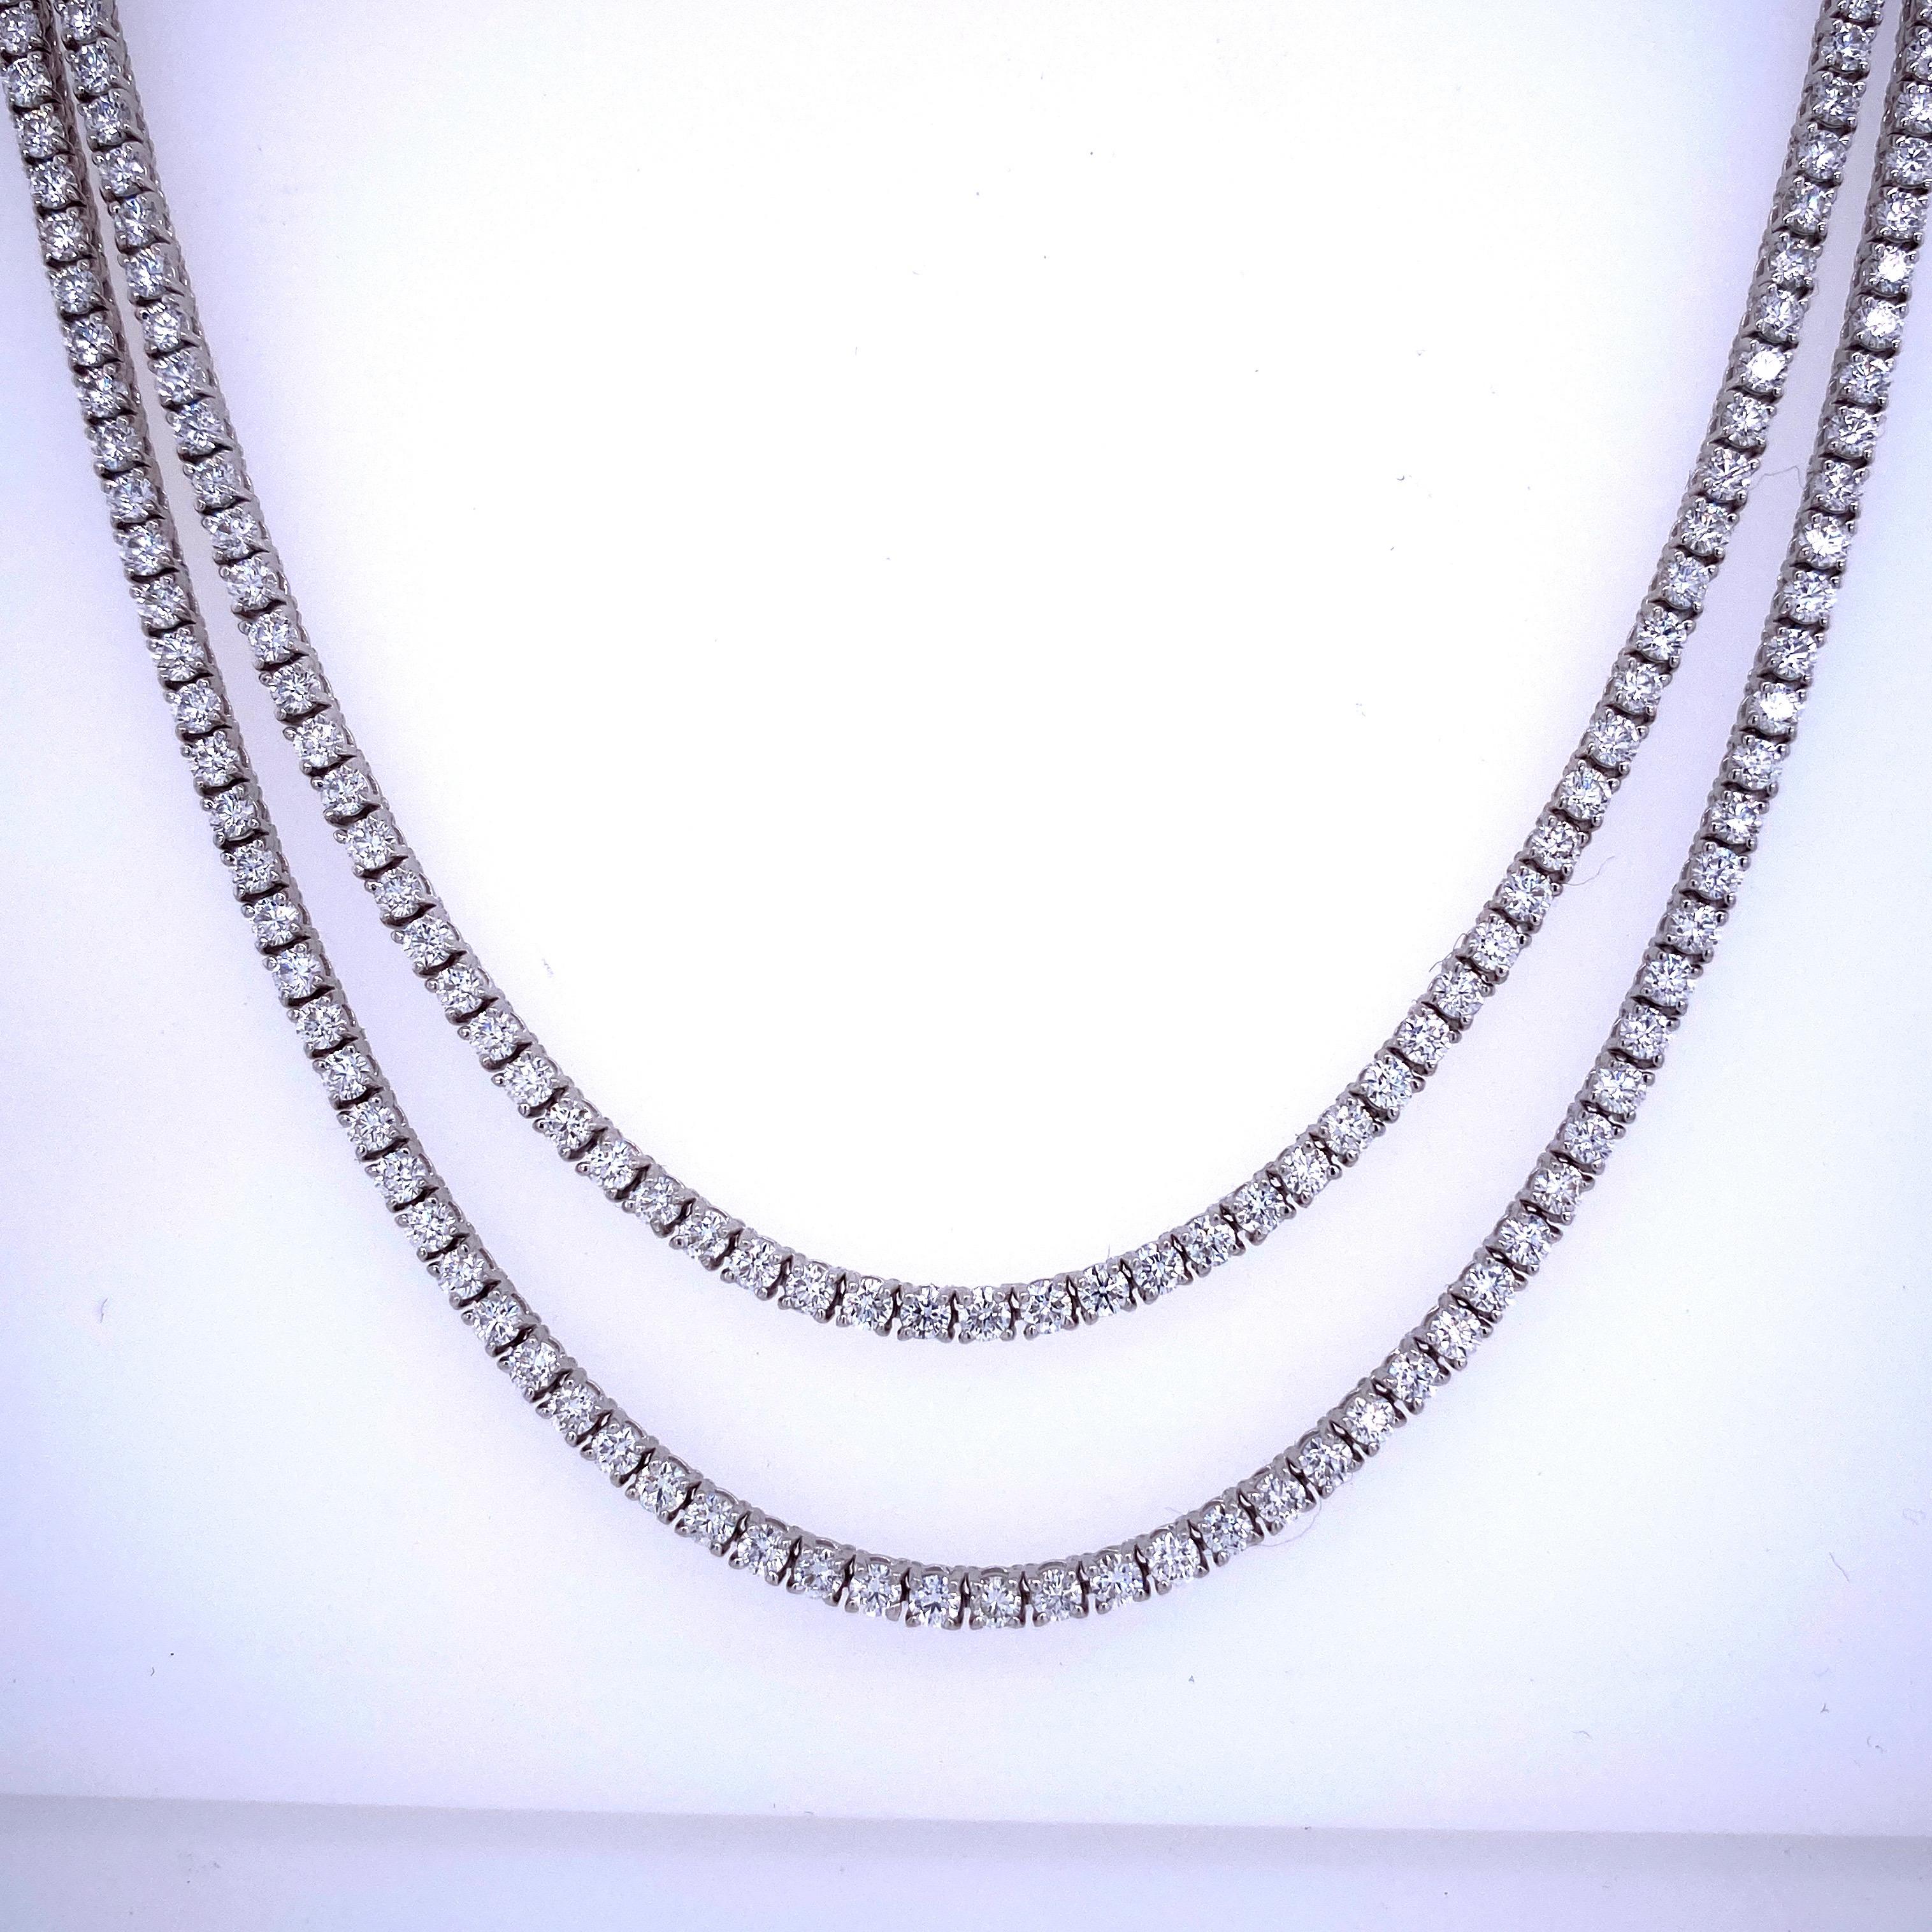 14K White Gold tennis necklace featuring a double diamond row of 215 round brilliants weighing 6.67 carats and high polished white gold beads in the back. 
Color G
Clarity SI2